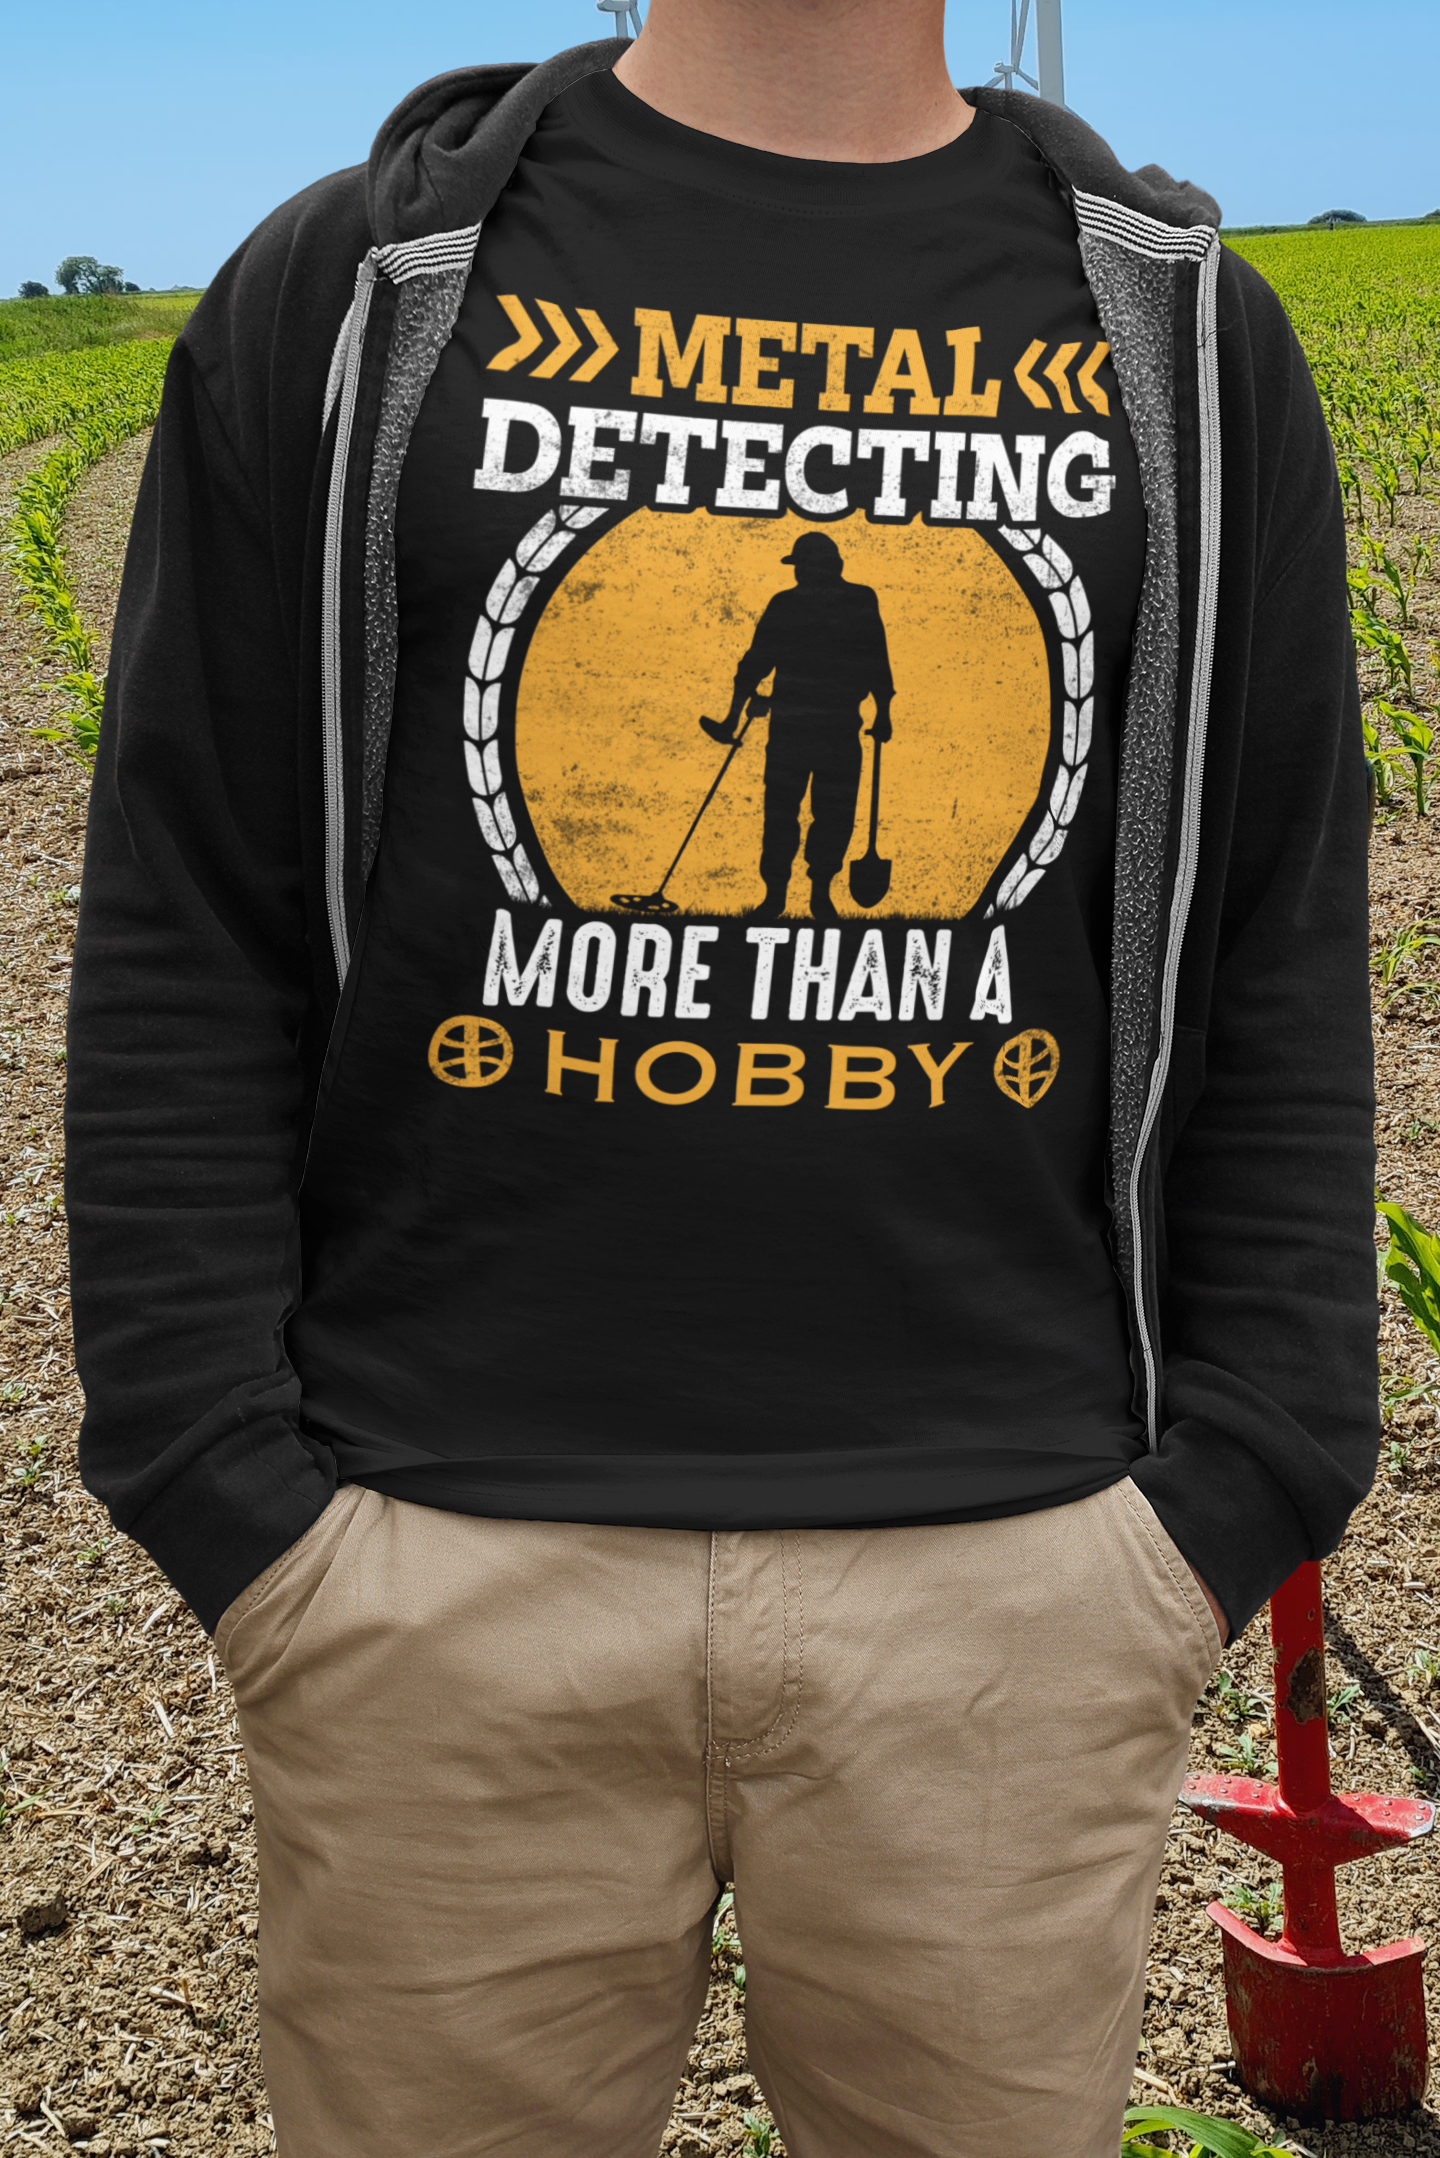 Metal detecting, more than a hobby.